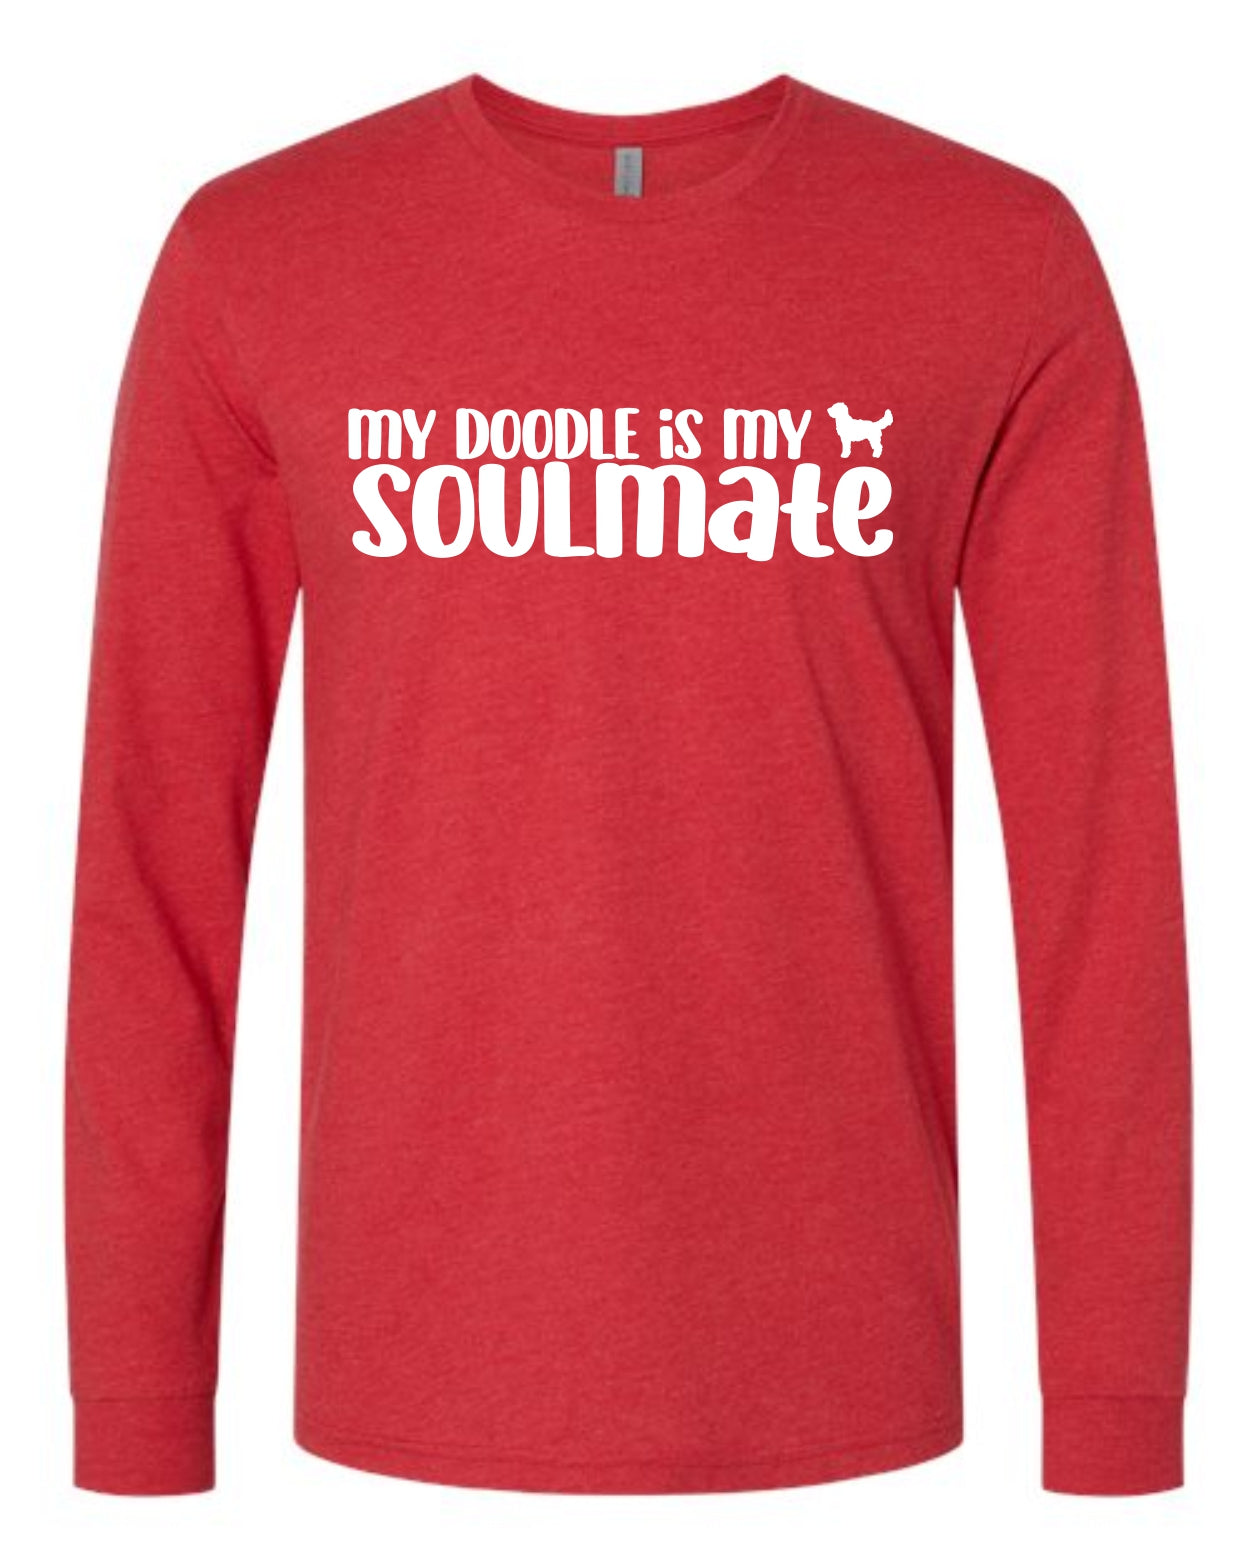 Soulmate LONG SLEEVE T Shirt - Heather Red